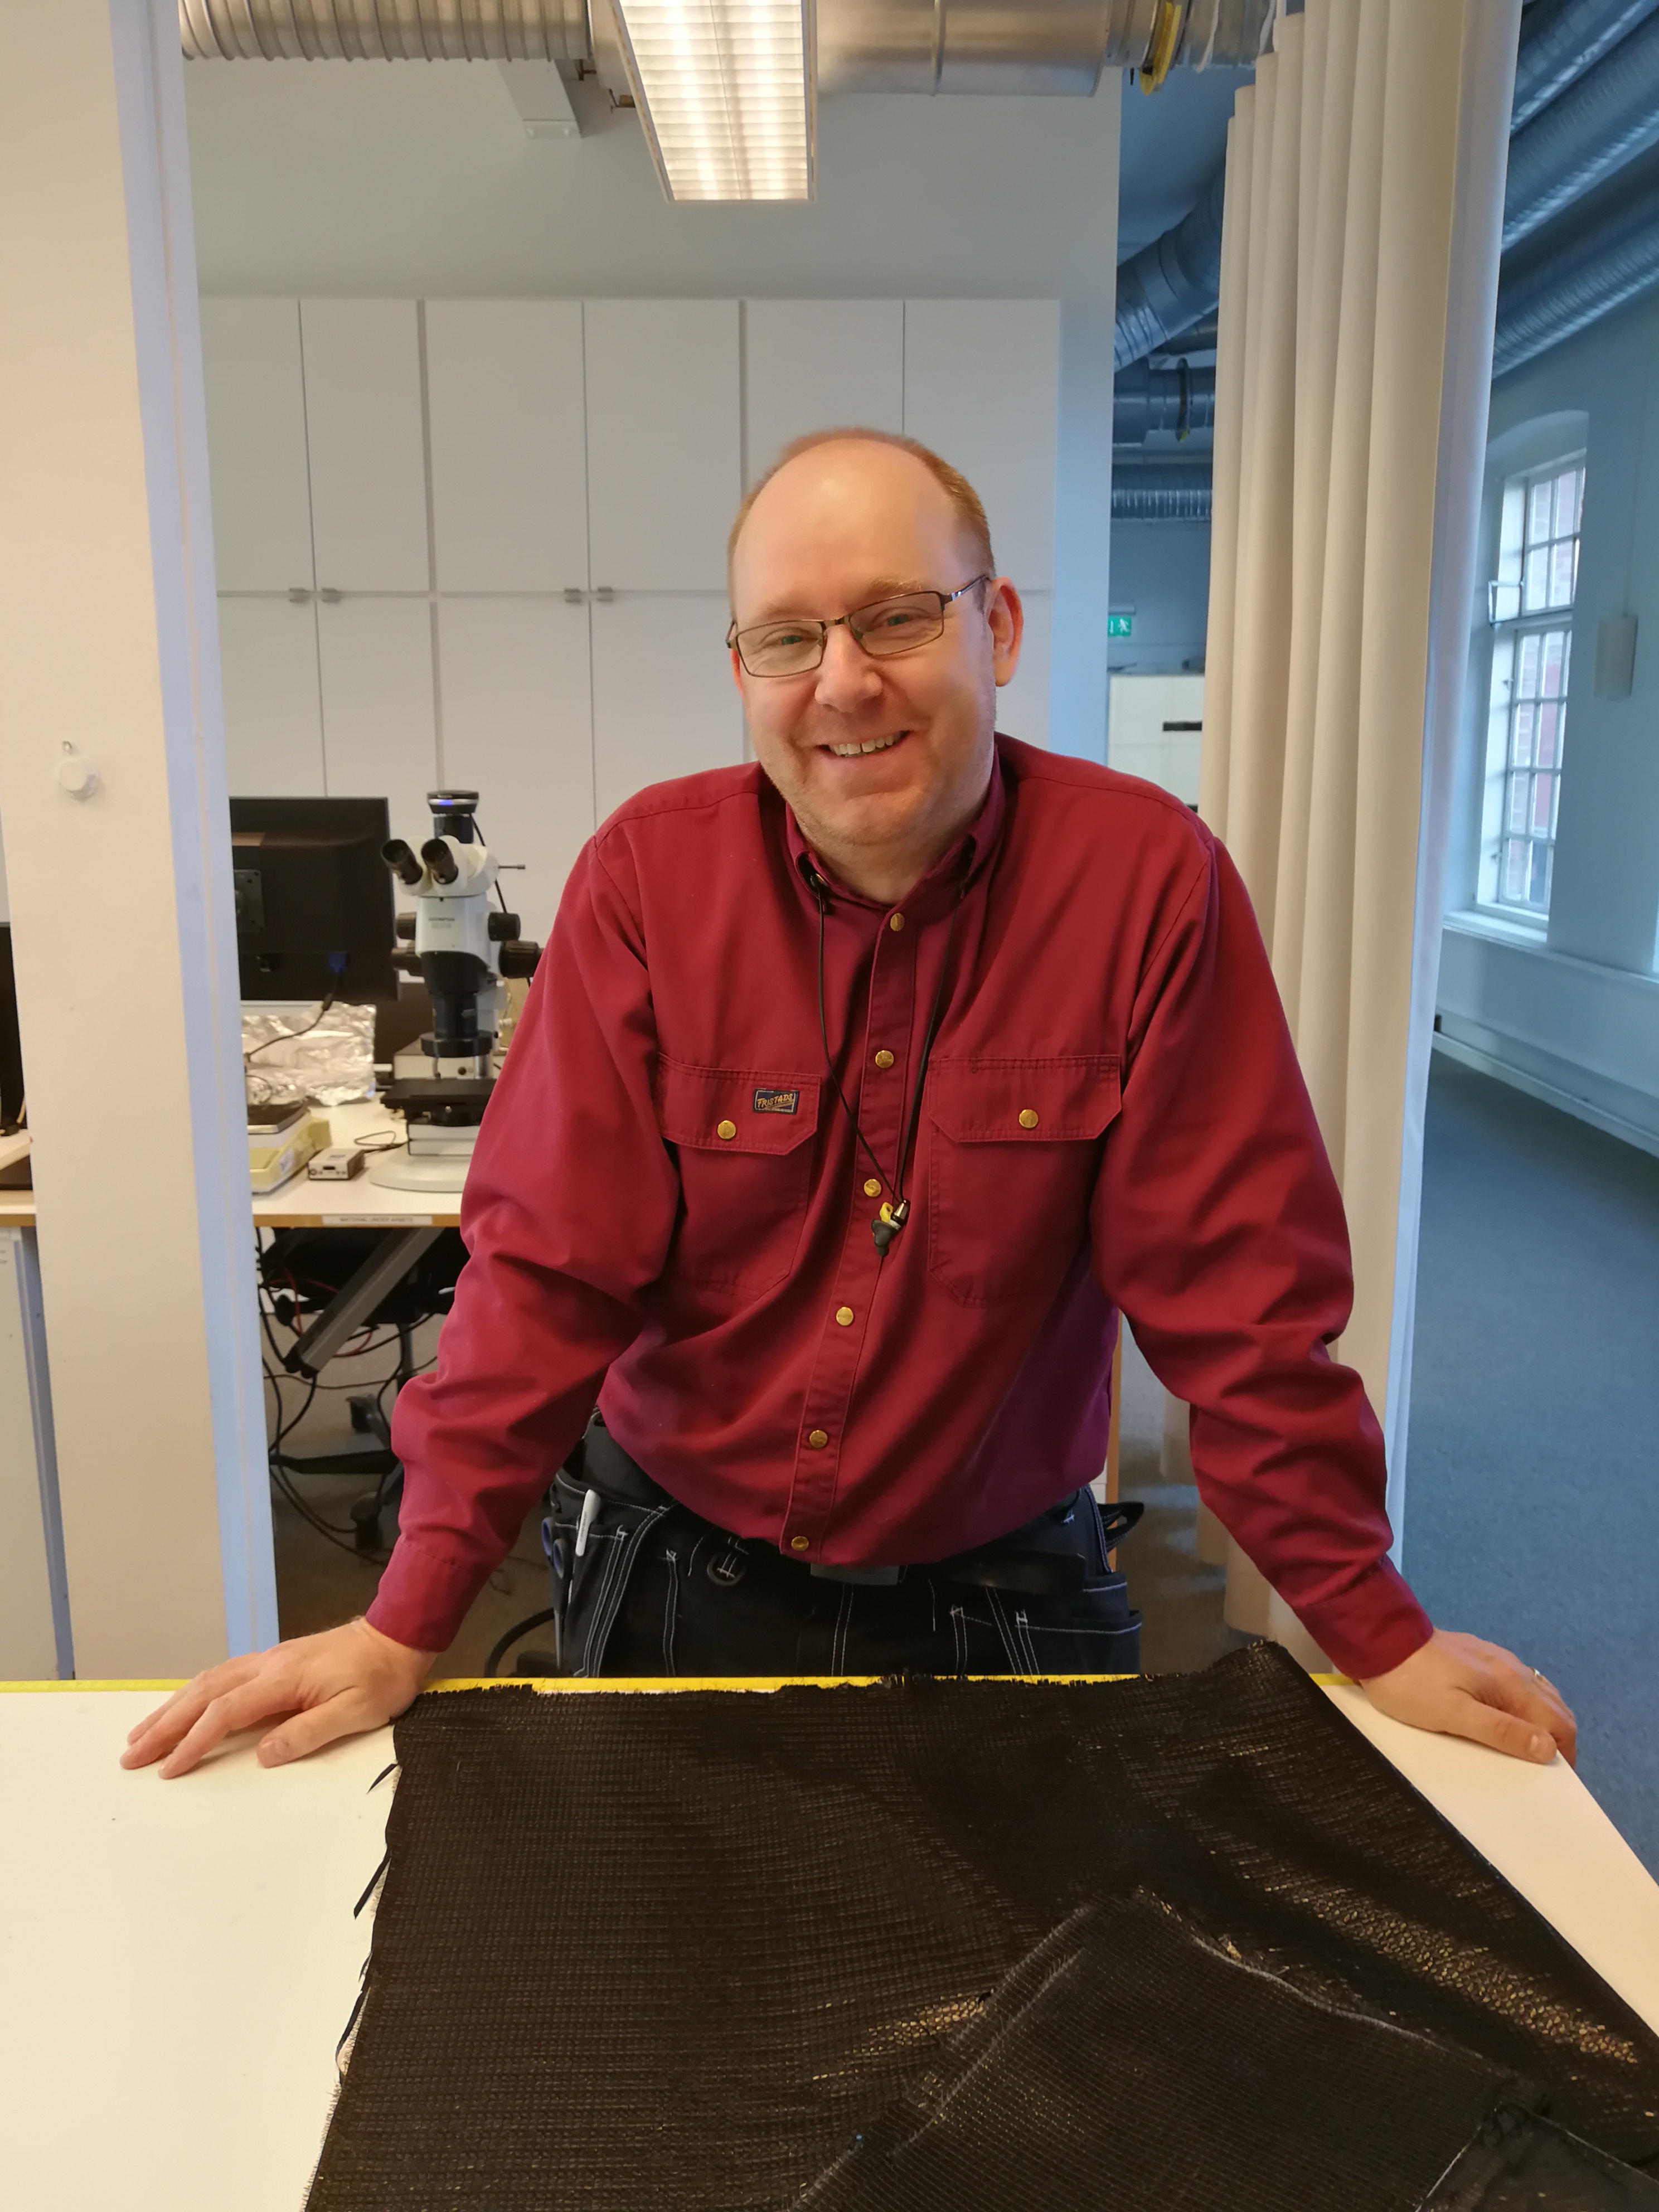 Production Technician, Magnus Hallin, can bring 50 years of shade and energy screen knitting samples to an R&D meeting.